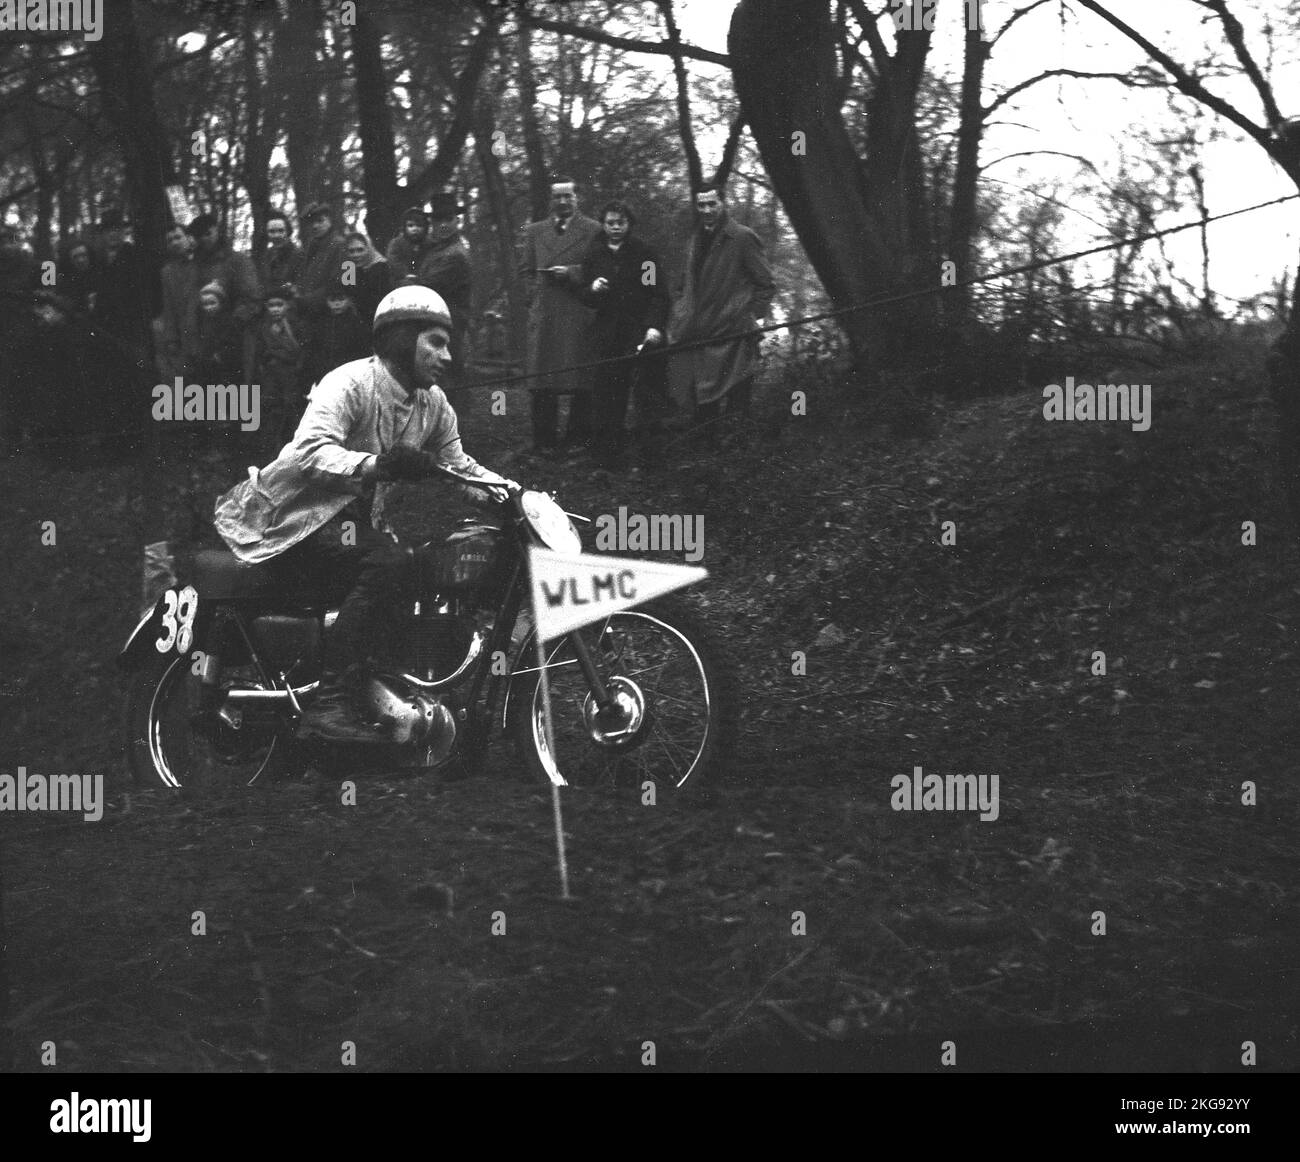 1954, historical, a competitor in the Seacroft Scramble on his Ariel motorcycle, England, UK. Founded in 1902, Ariel Motorcycles was a British maker of first bicycles, then motorcycles located in Bournbrook, Birmingham, which survived until 1967. Stock Photo